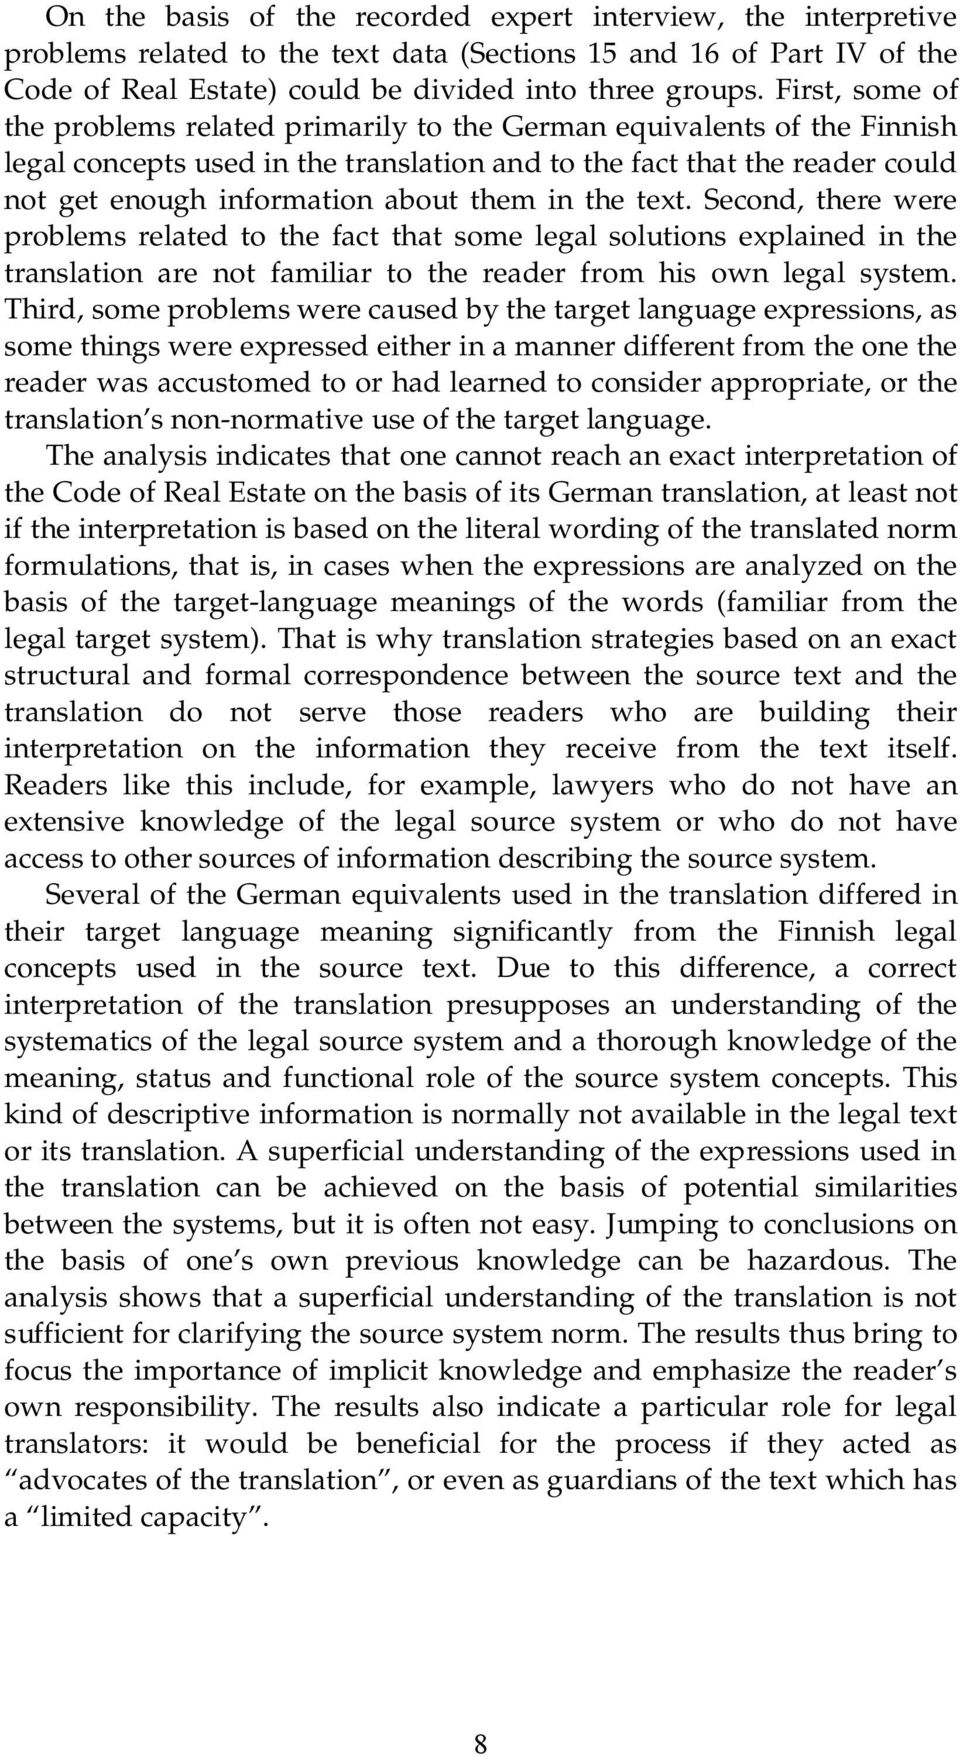 them in the text. Second, there were problems related to the fact that some legal solutions explained in the translation are not familiar to the reader from his own legal system.